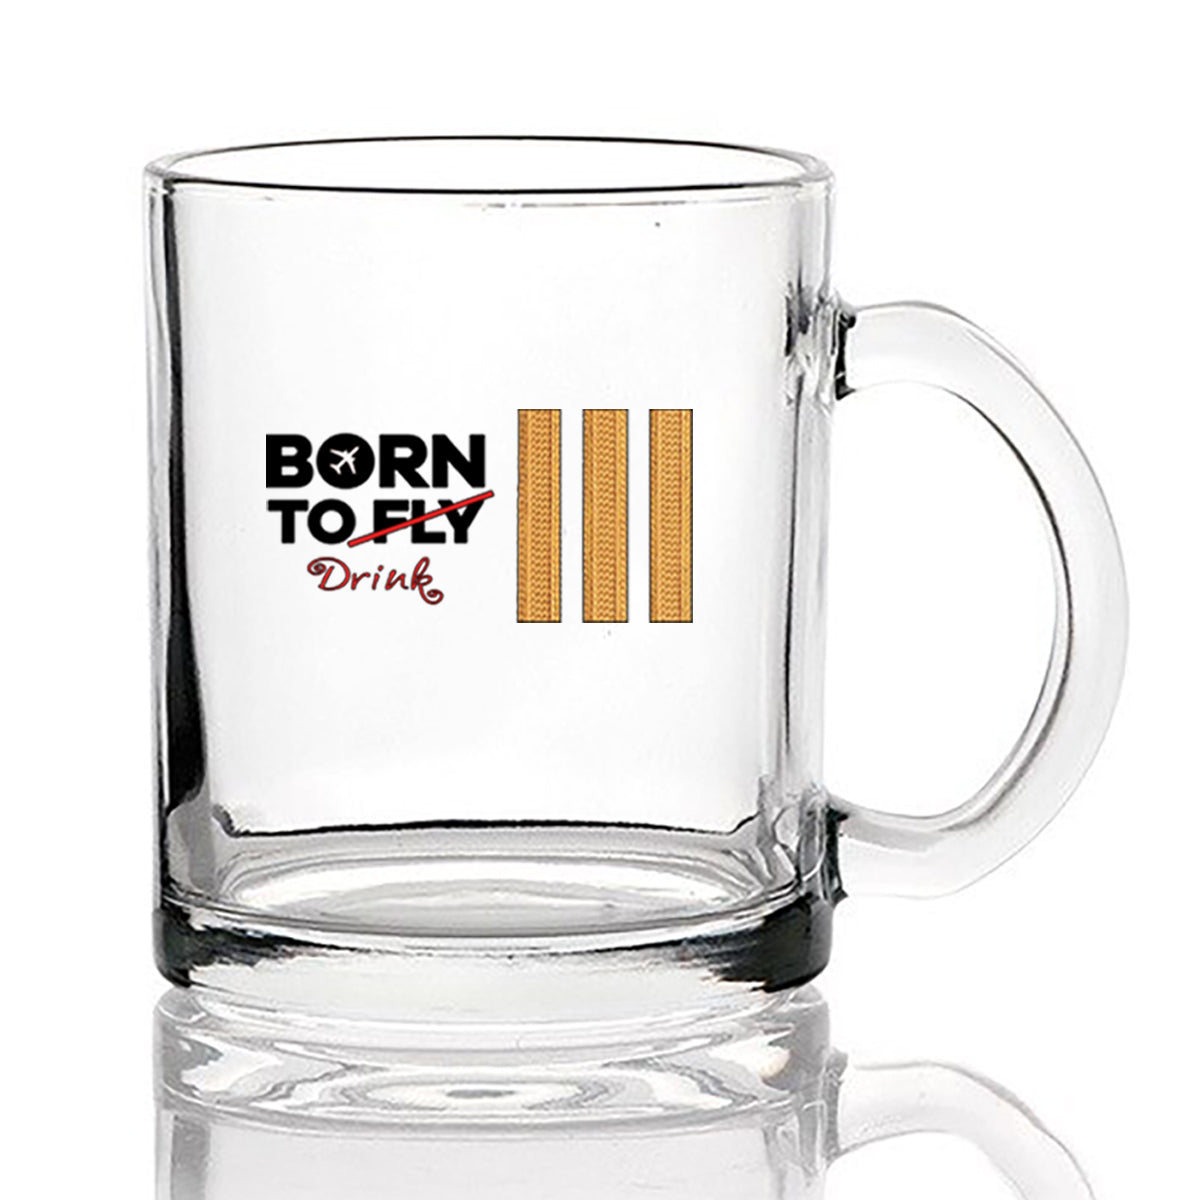 Born To Drink & 3 Lines Designed Coffee & Tea Glasses